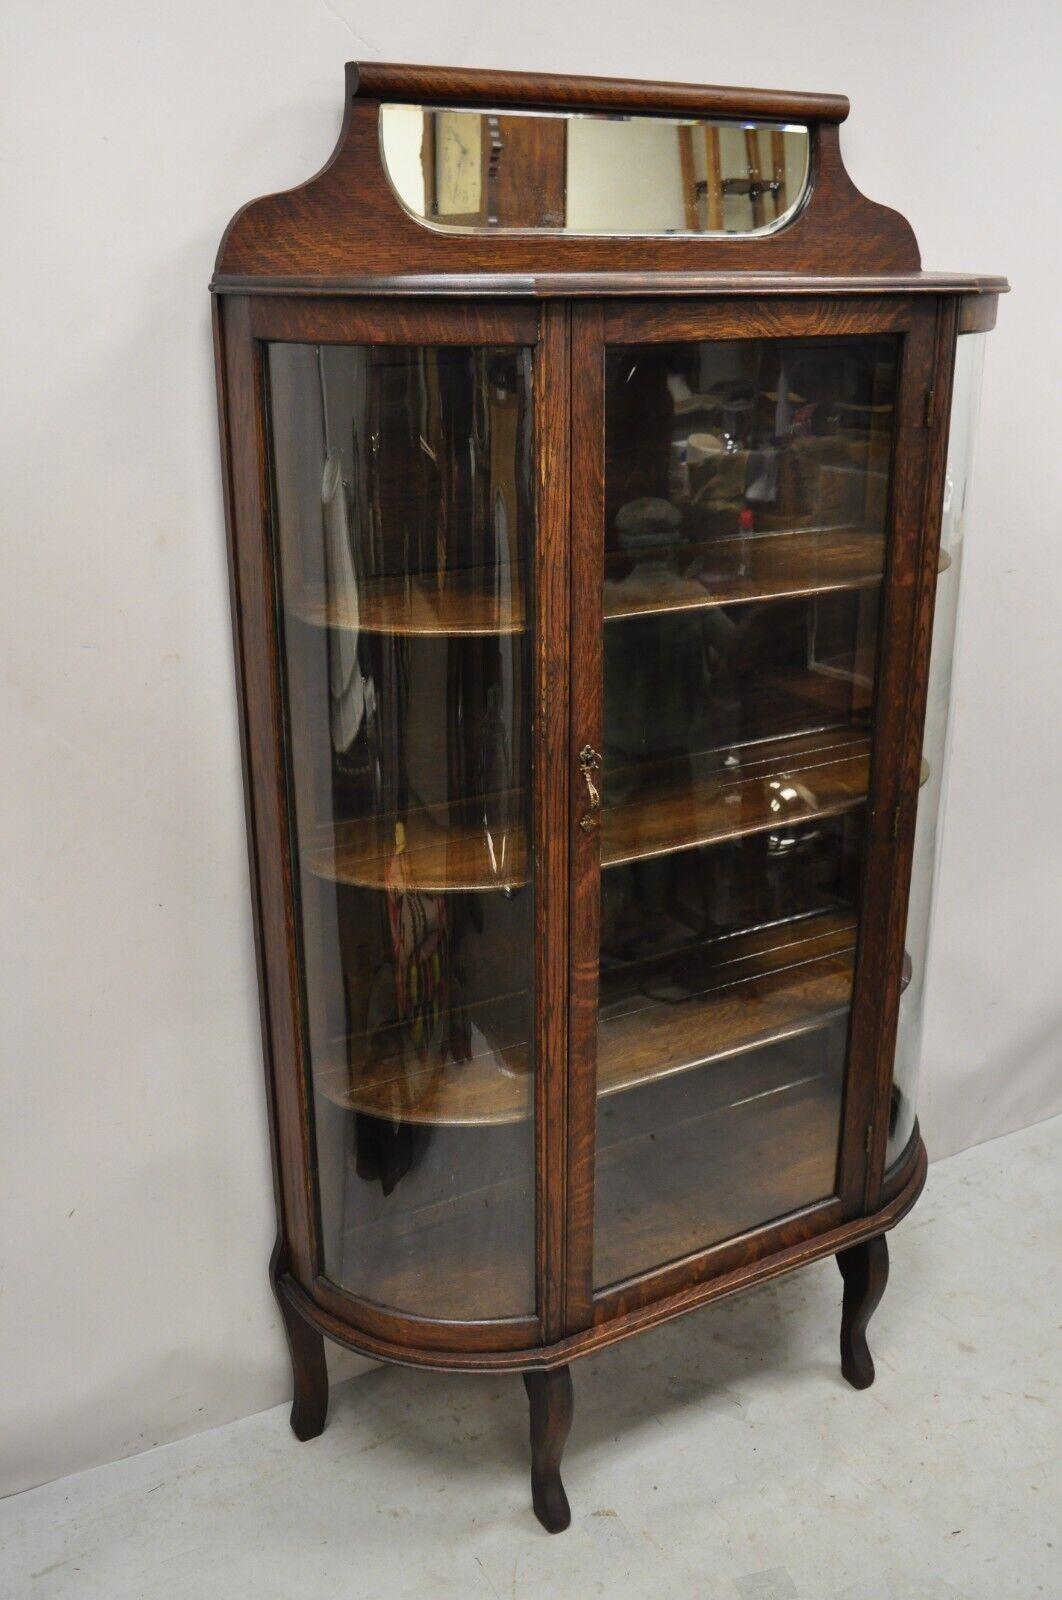 Antique American Victorian oak wood curved glass china display cabinet. Item features a curved glass sides, beveled glass mirror backsplash, beautiful wood grain, 1 glass swing door, 3 wooden shelves, very nice antique item. circa Early 1900s.